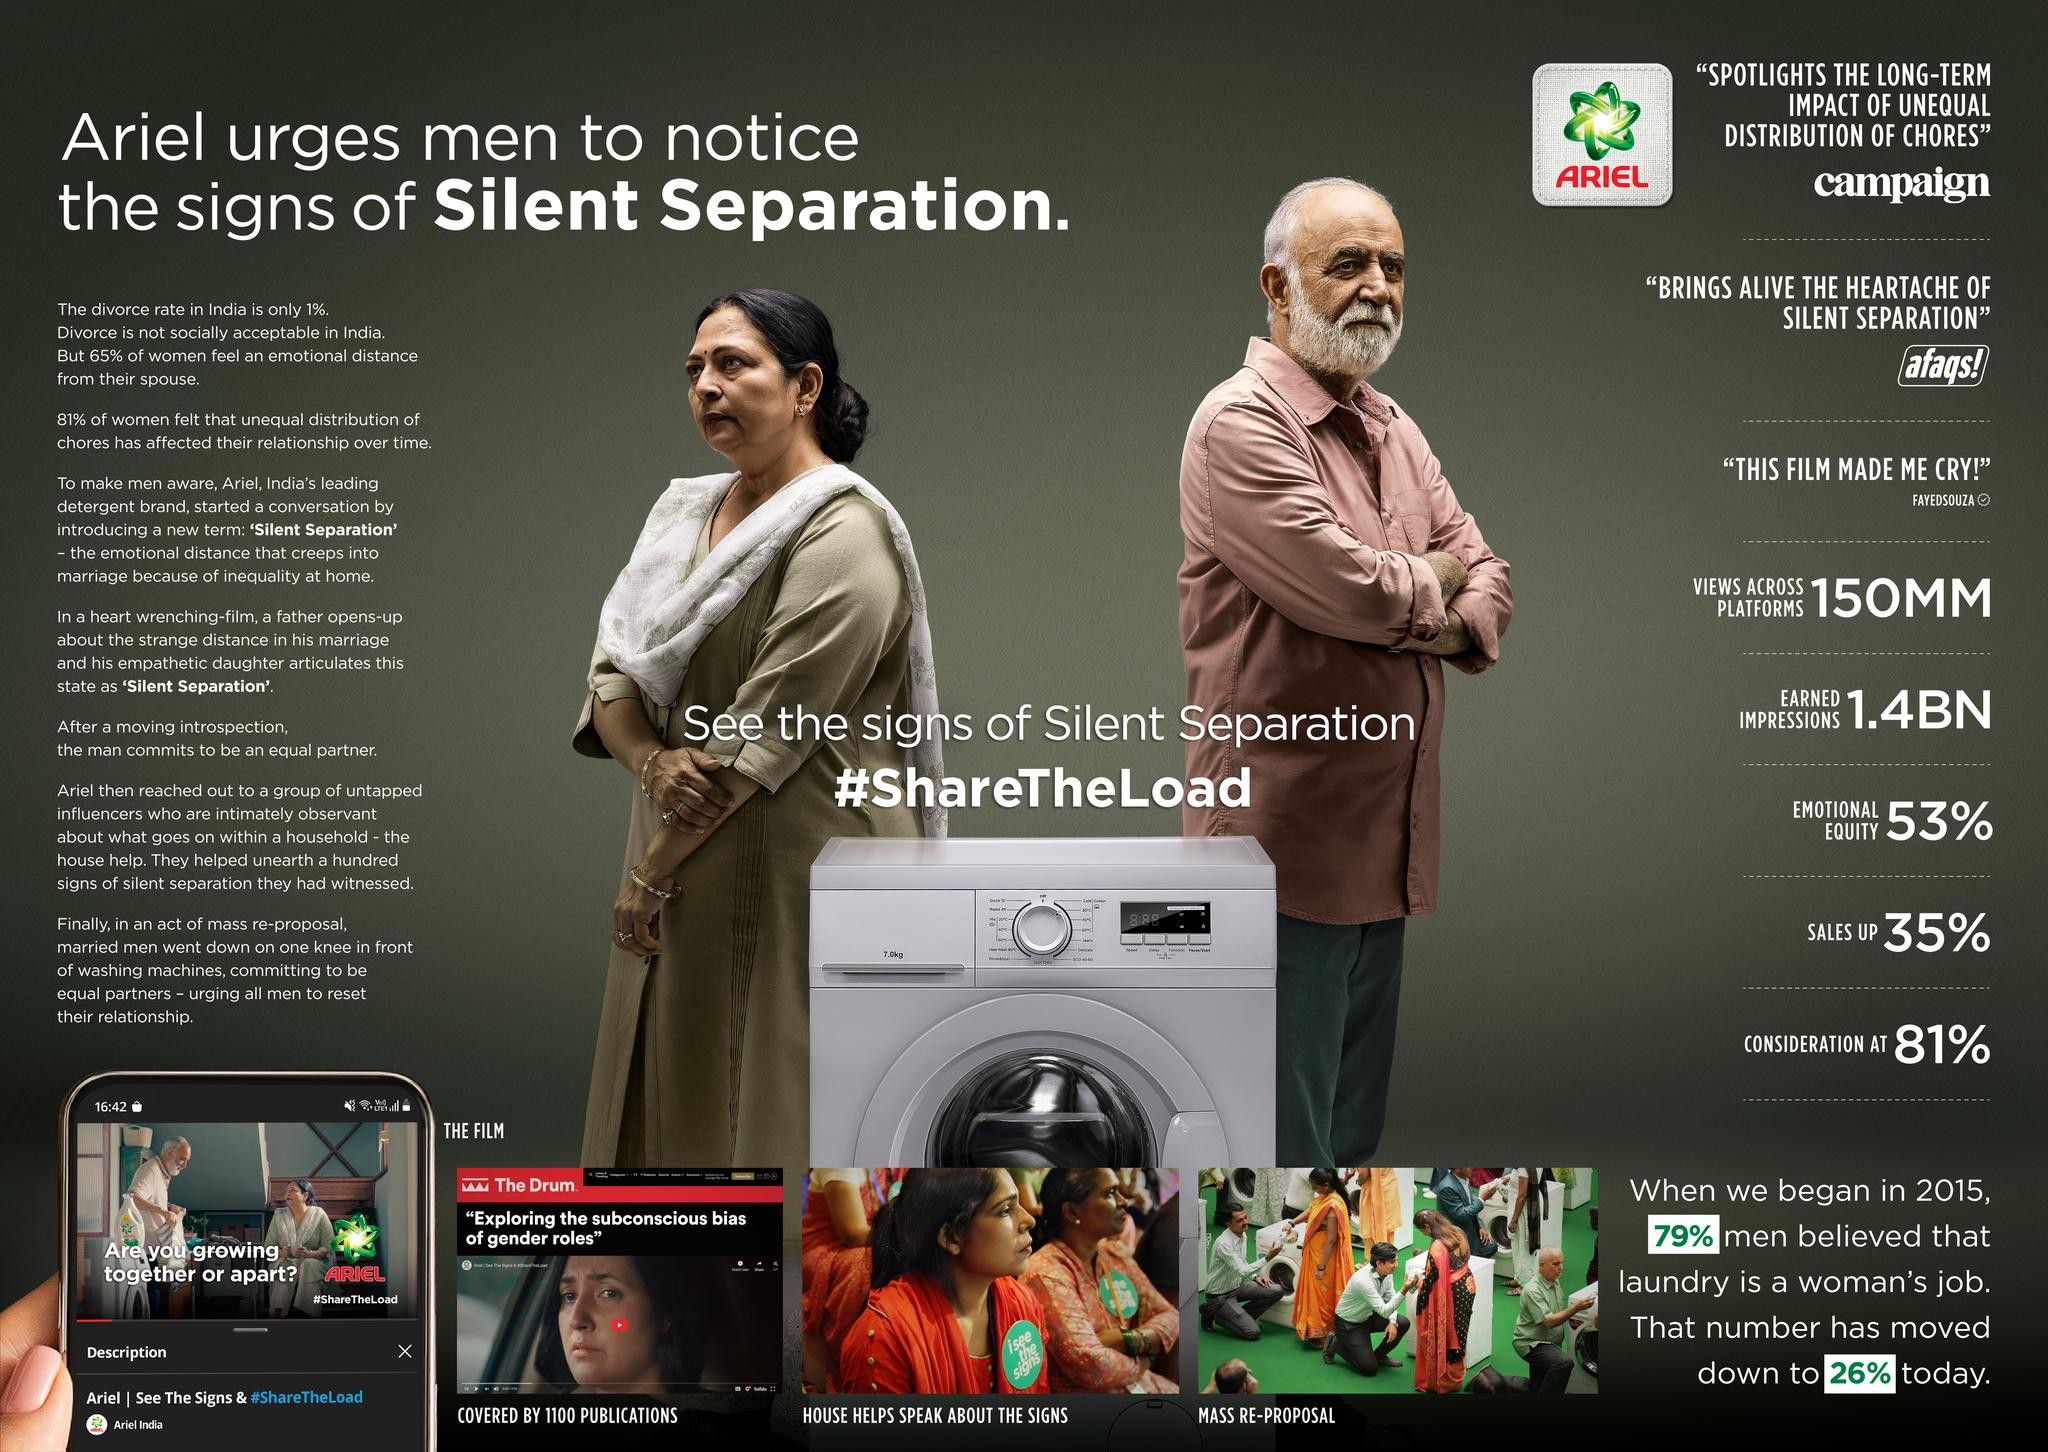 SEE THE SIGNS OF 'SILENT SEPARATION' #SHARETHELOAD